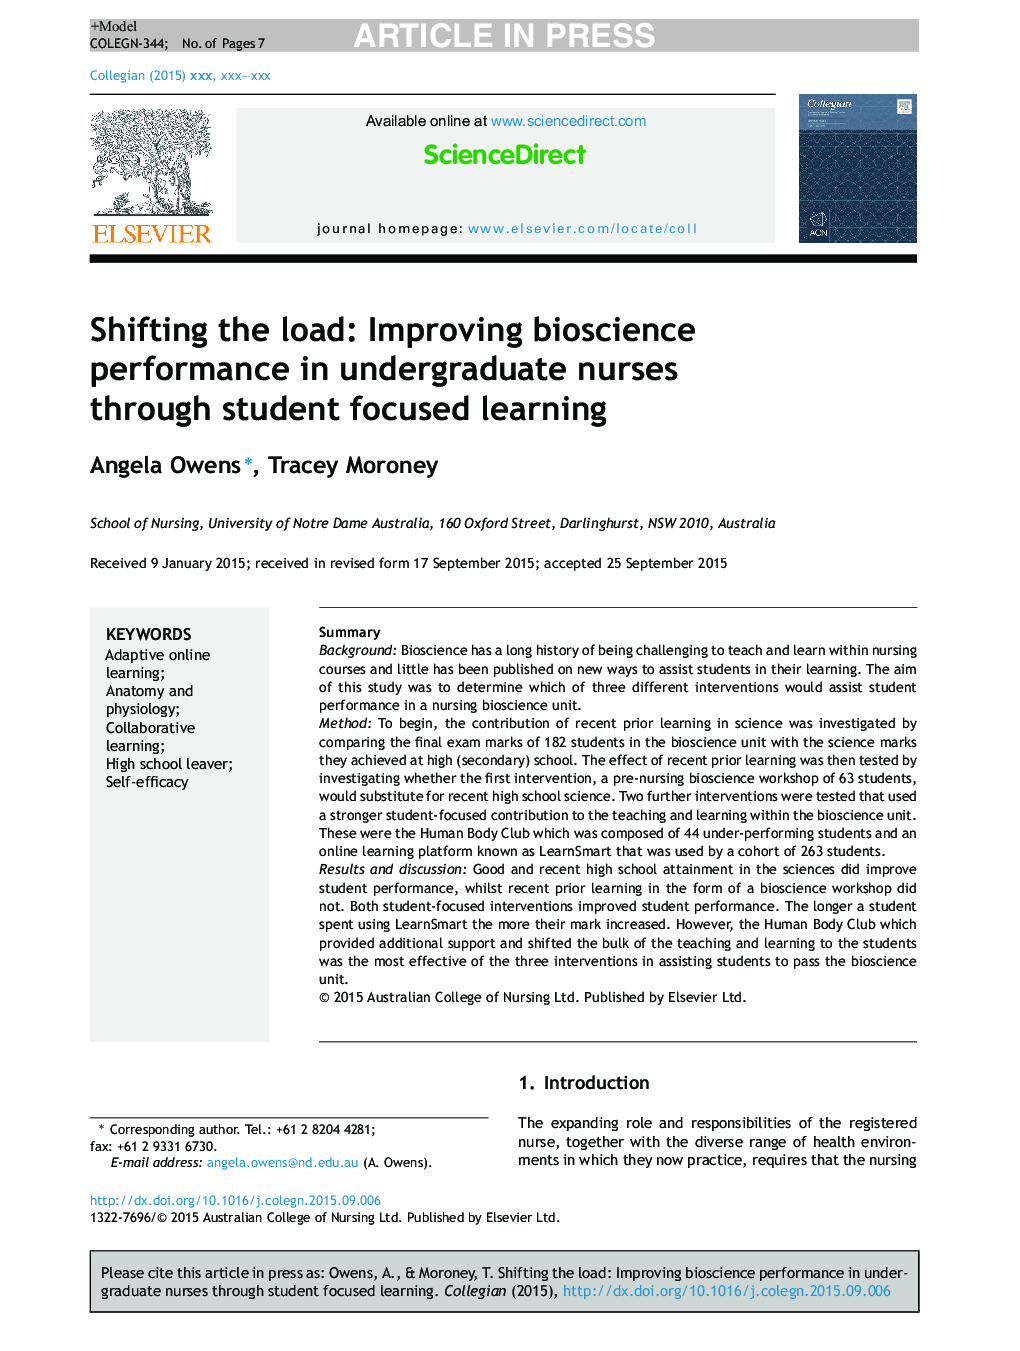 Shifting the load: Improving bioscience performance in undergraduate nurses through student focused learning